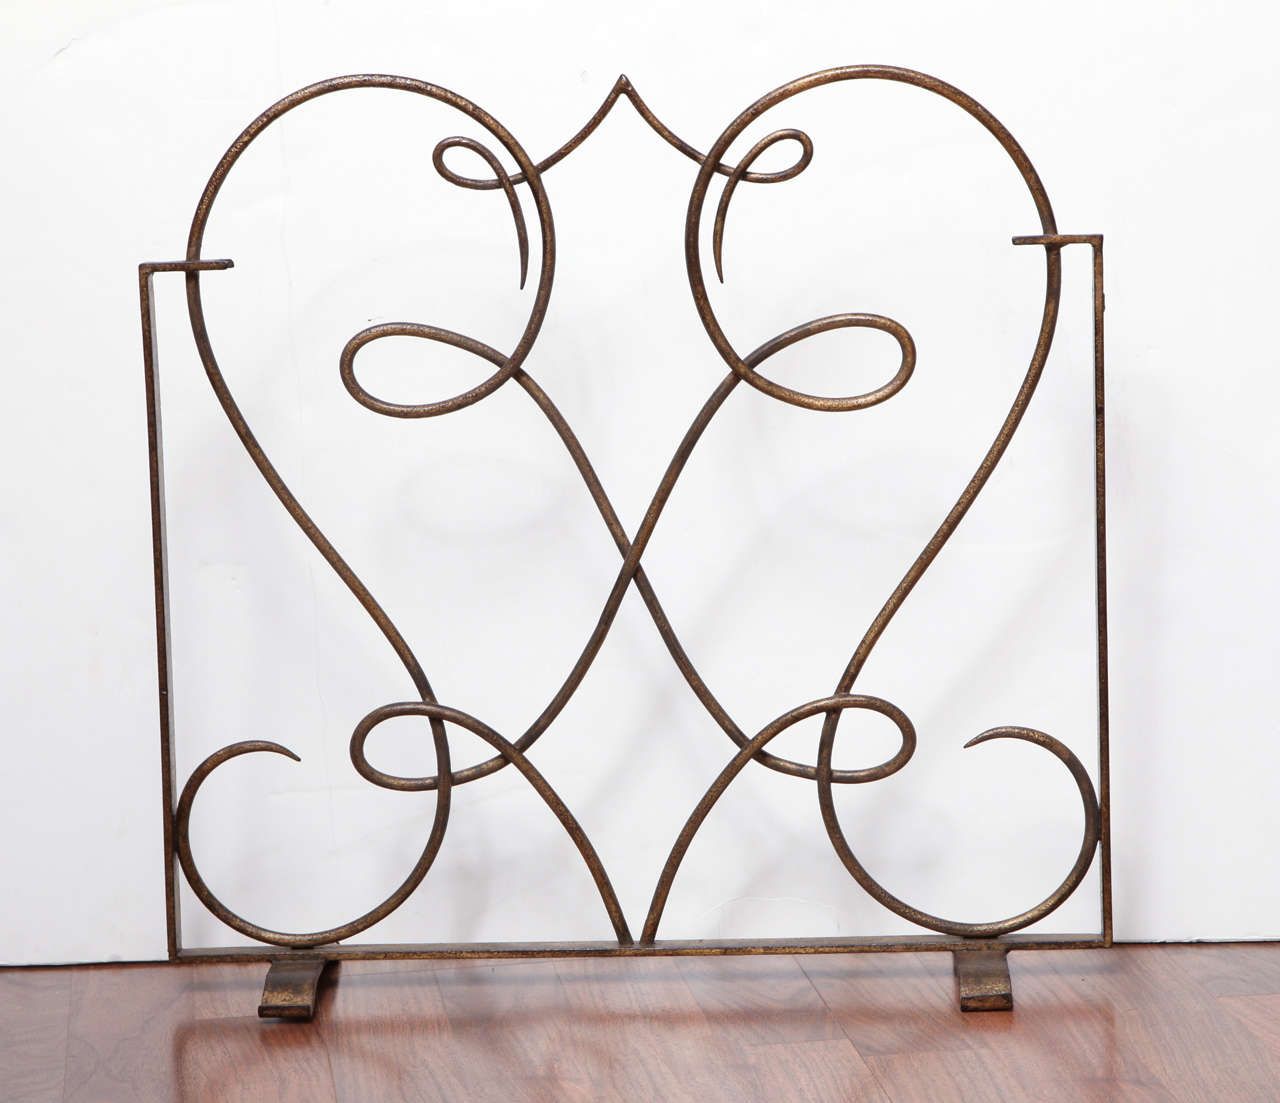 Attributed René Drouet (1899 - 1993)
Gilded iron fire-screen, with openwork of interlaced windings on two skate-feet. 
H: 21 1/2